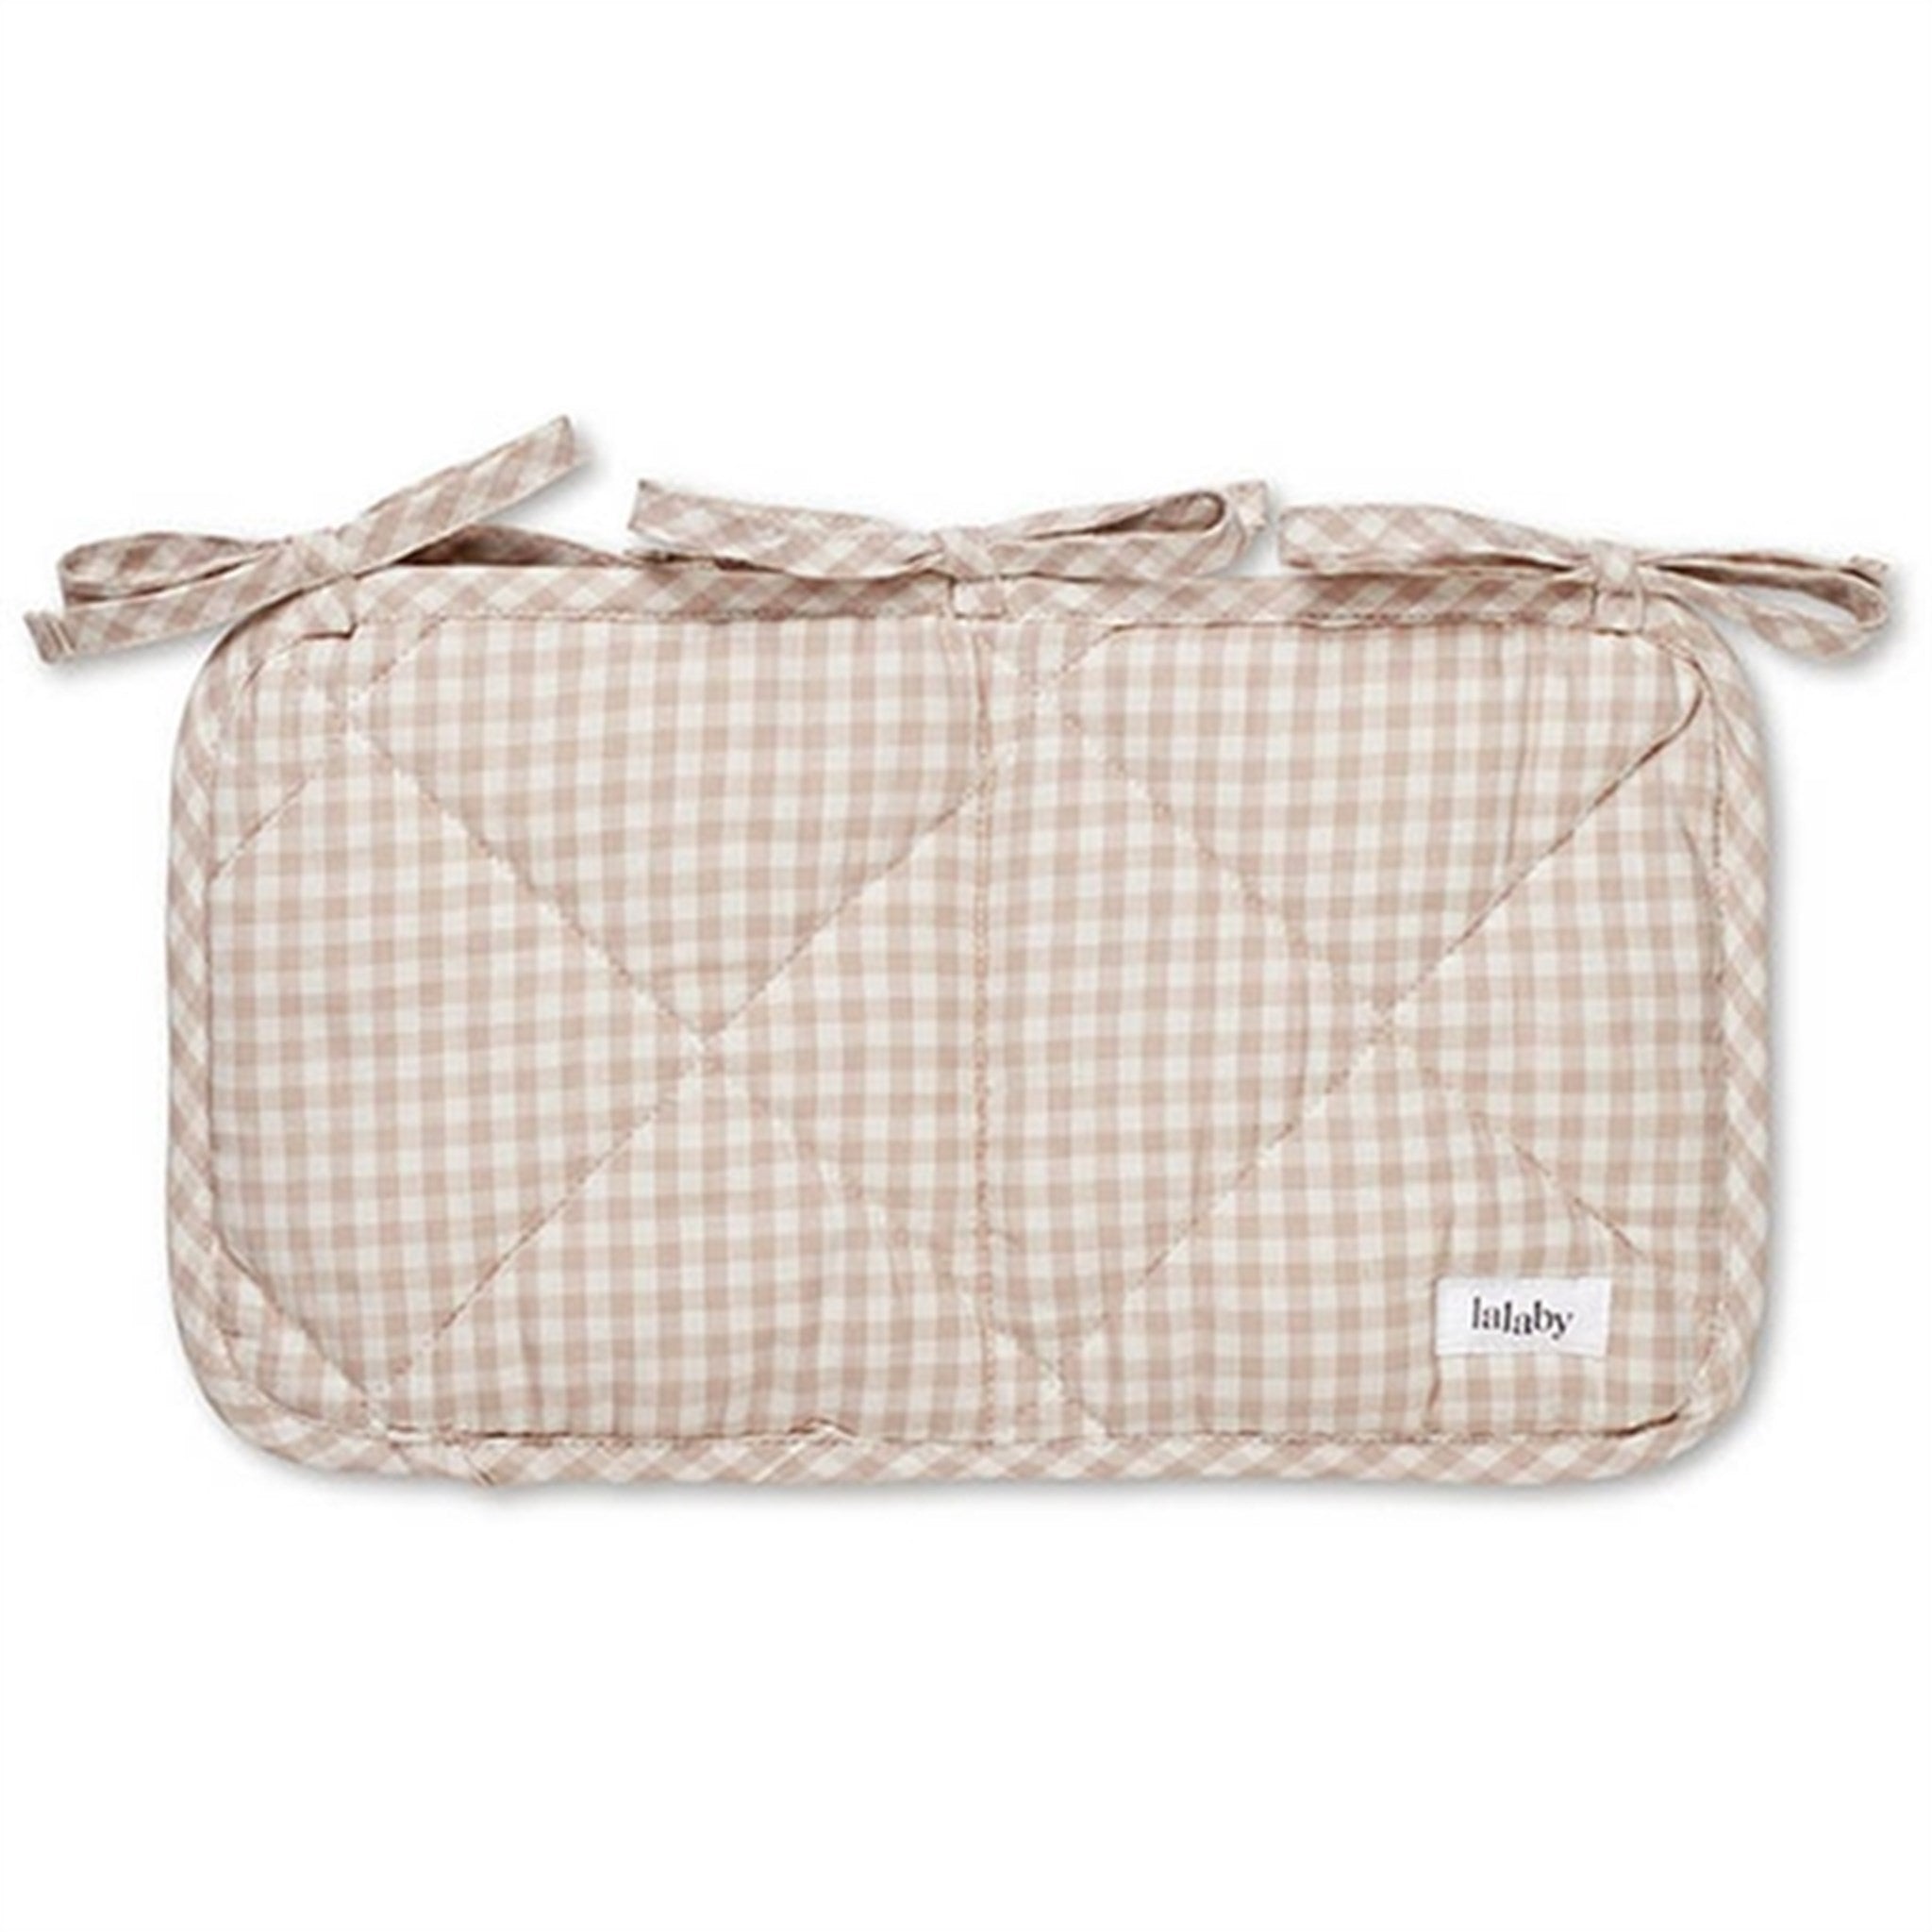 Lalaby Sängficka Beige Gingham